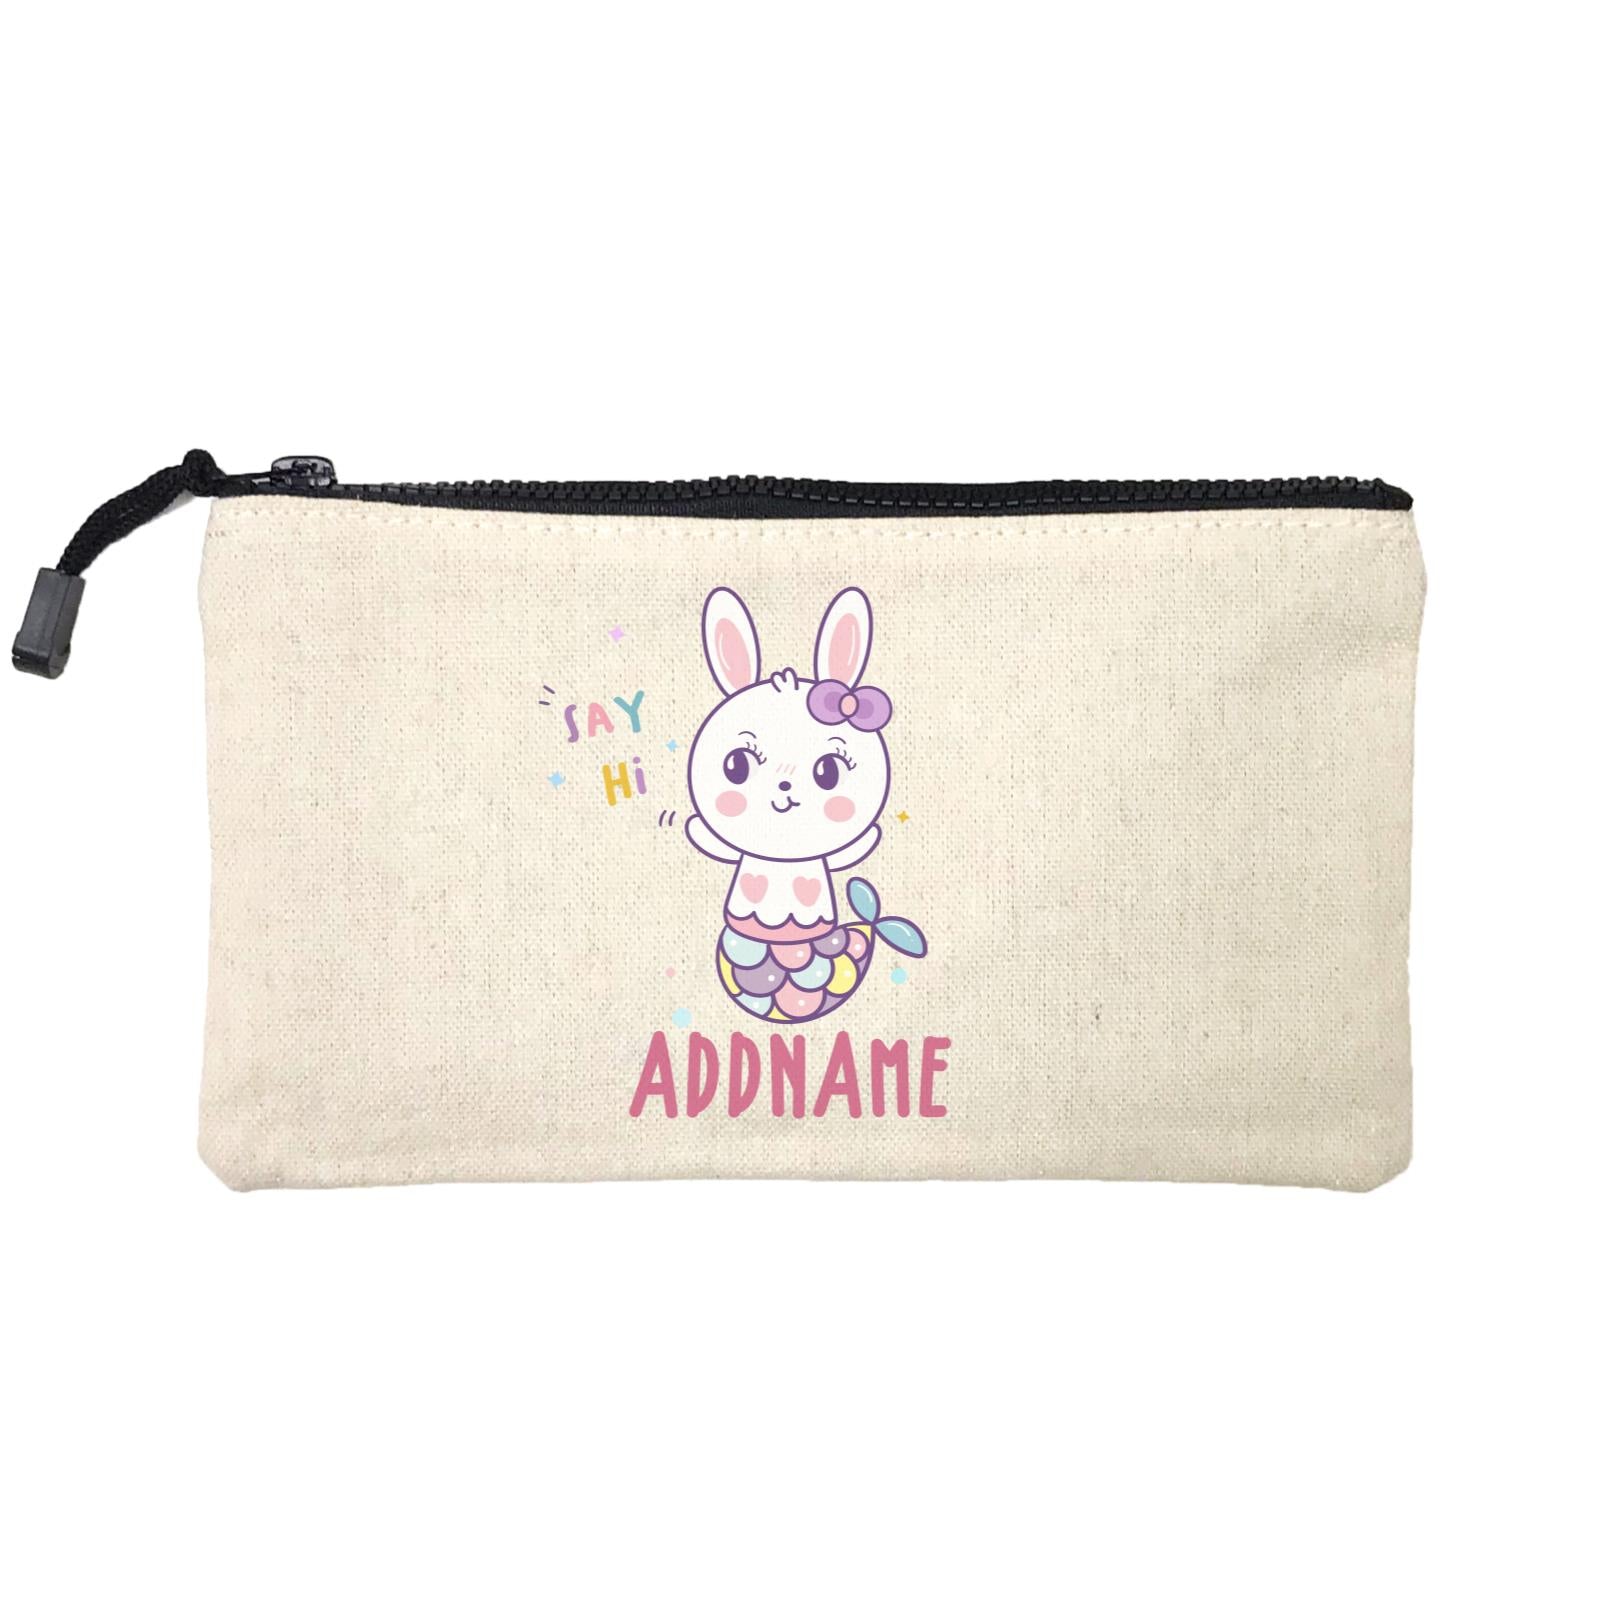 Unicorn And Princess Series Cute Say Hi Rabbit Mermaid Addname Mini Accessories Stationery Pouch